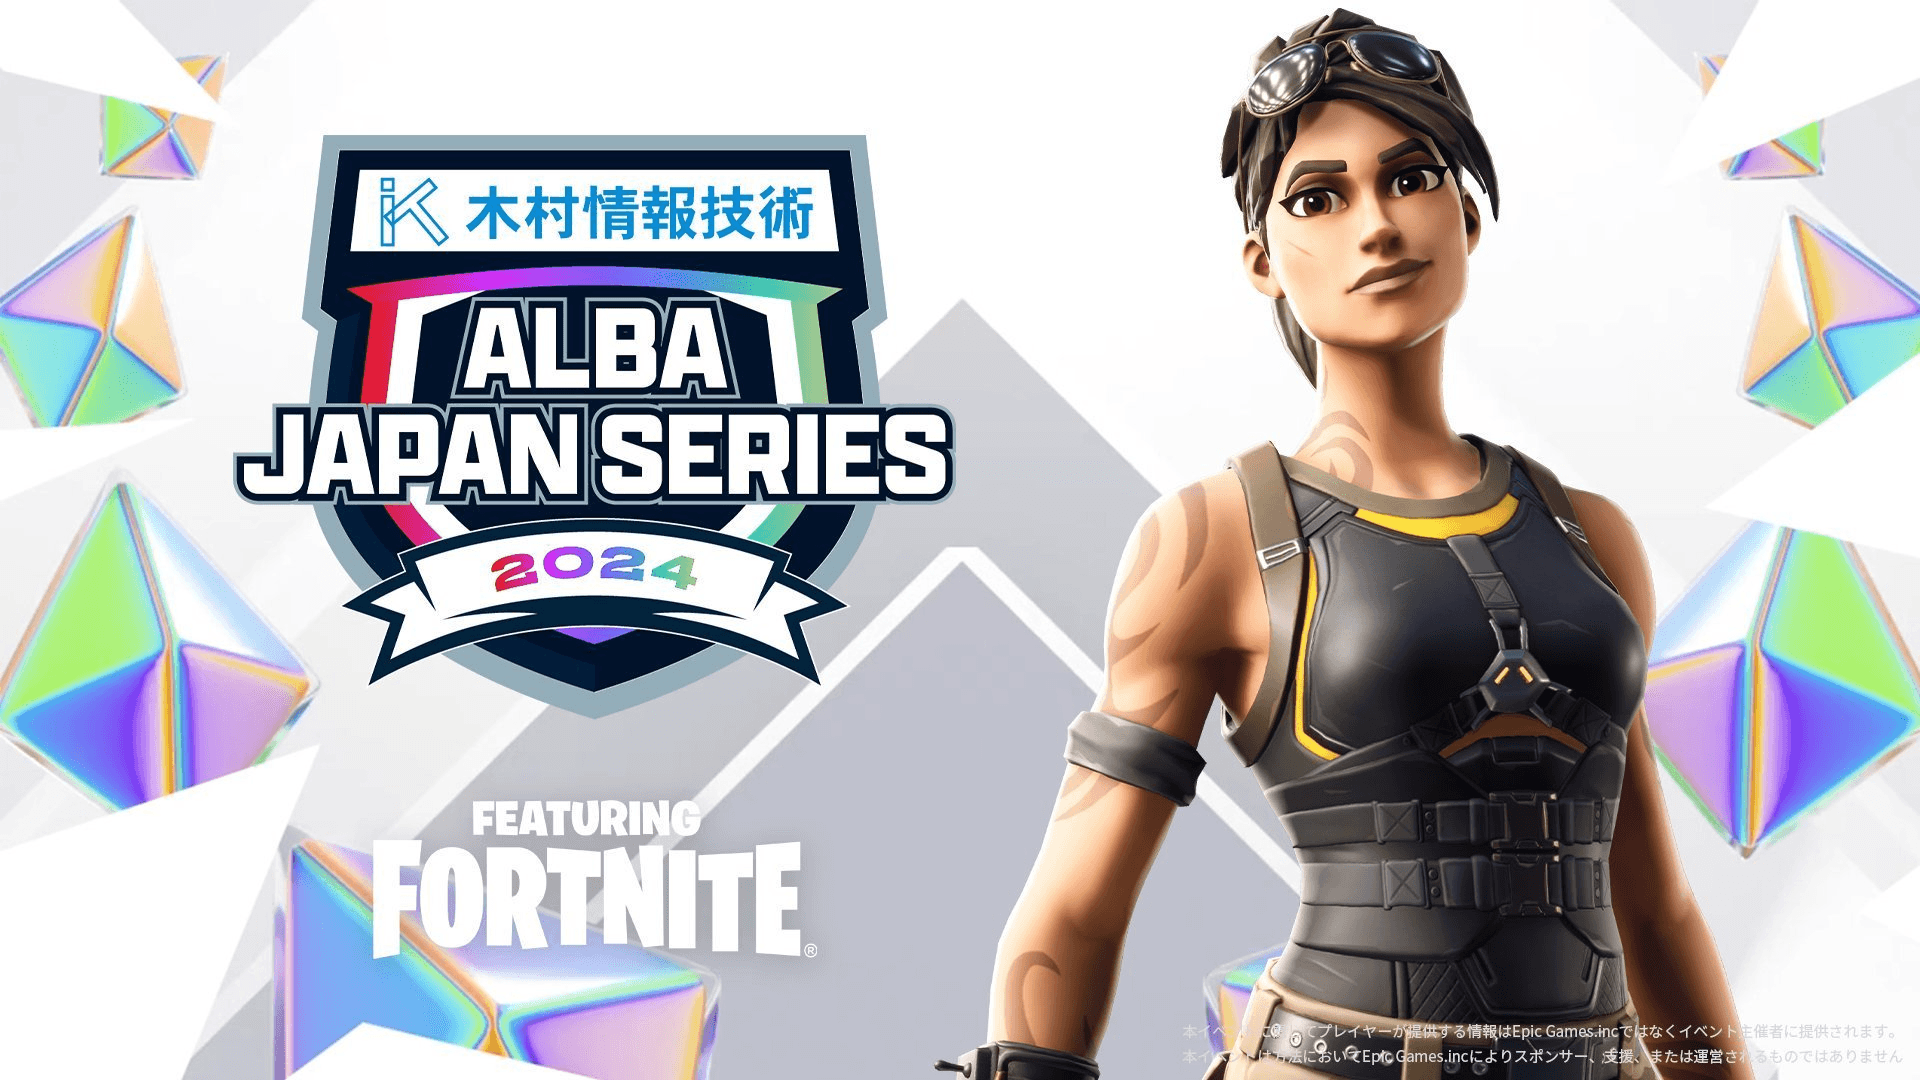 ALBA JAPAN SERIES featuring Fortnite #9 feature image